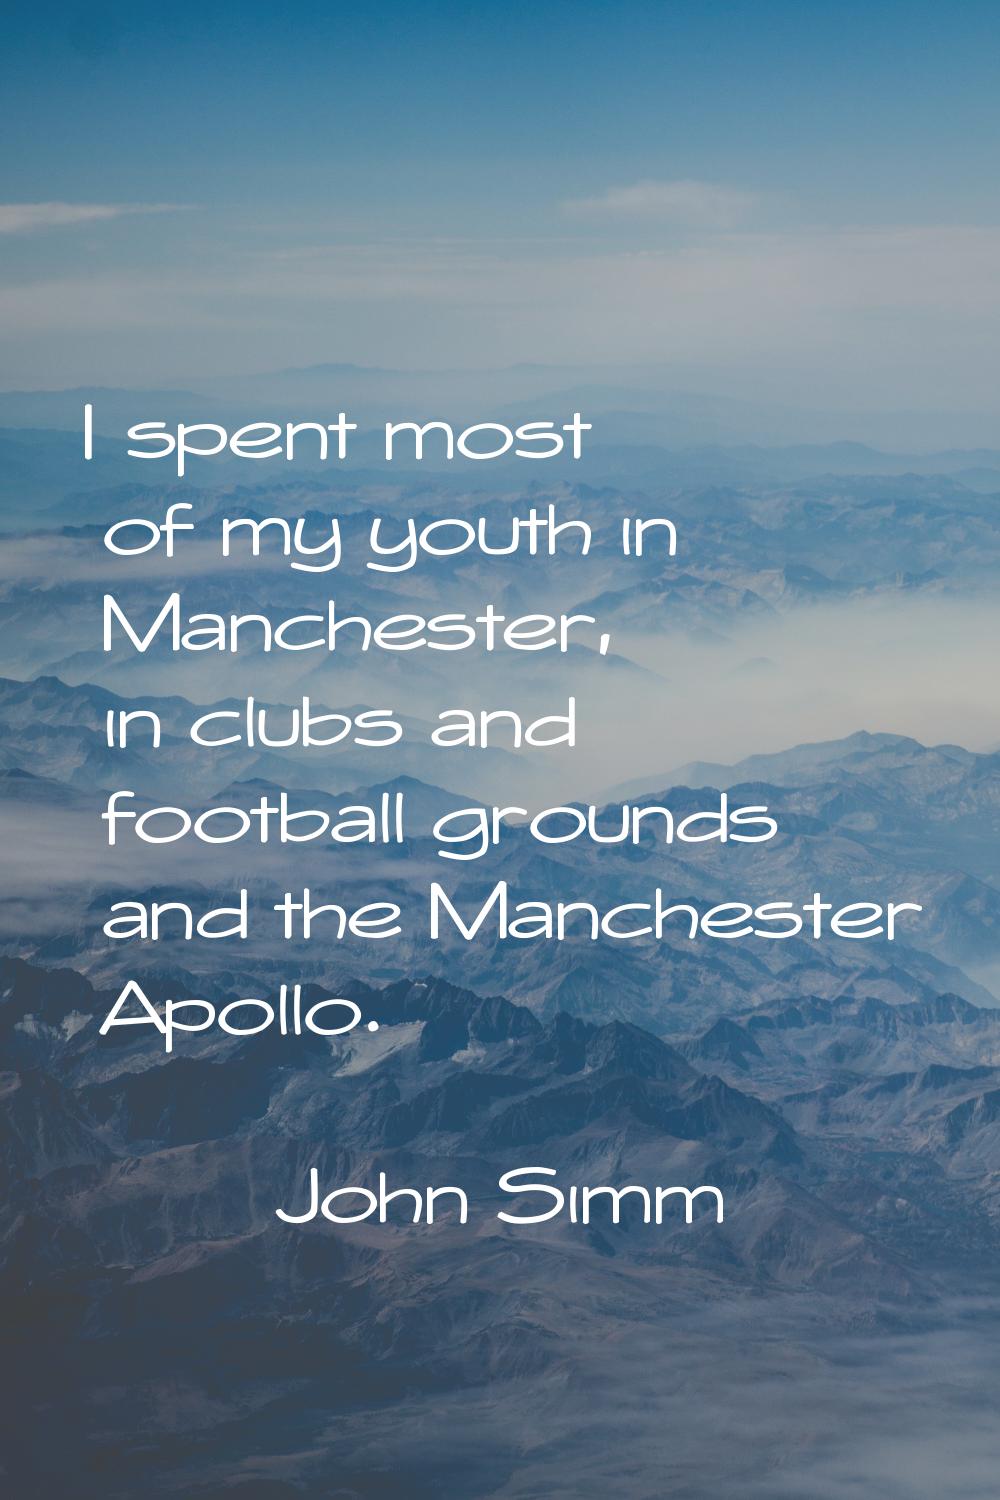 I spent most of my youth in Manchester, in clubs and football grounds and the Manchester Apollo.